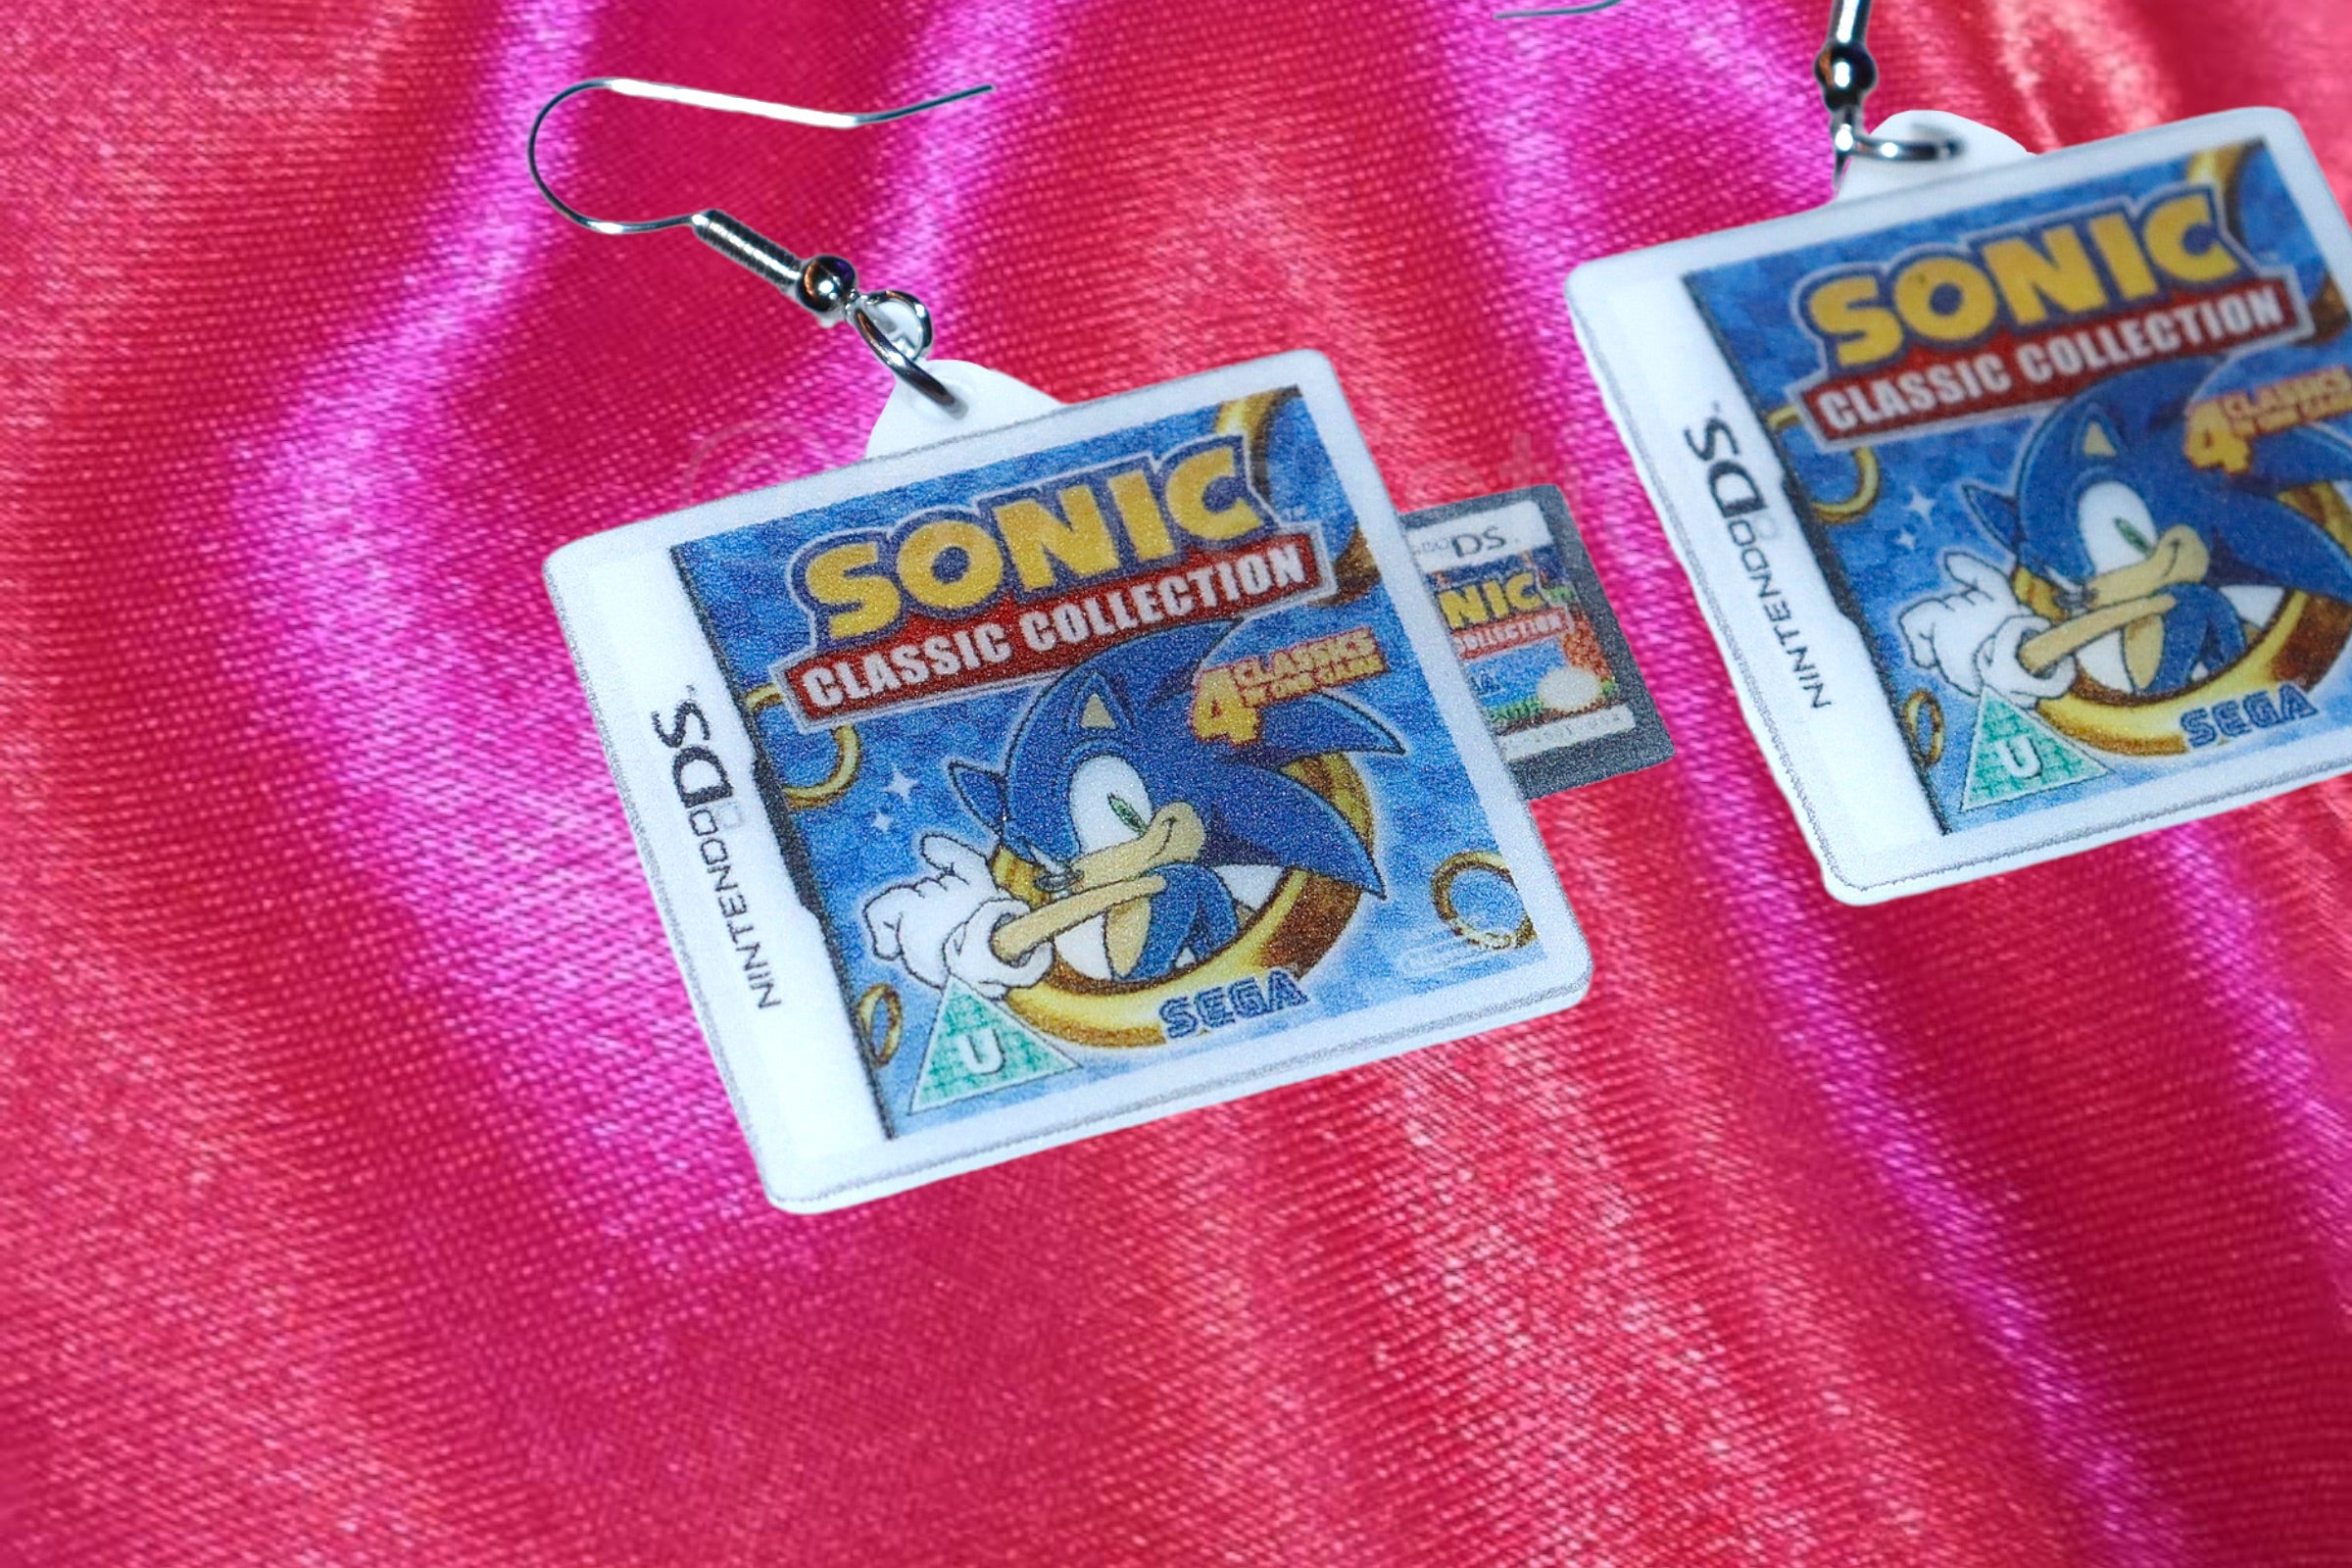 Sonic Classic Collection for Nintendo DS (Complete) for Sale in